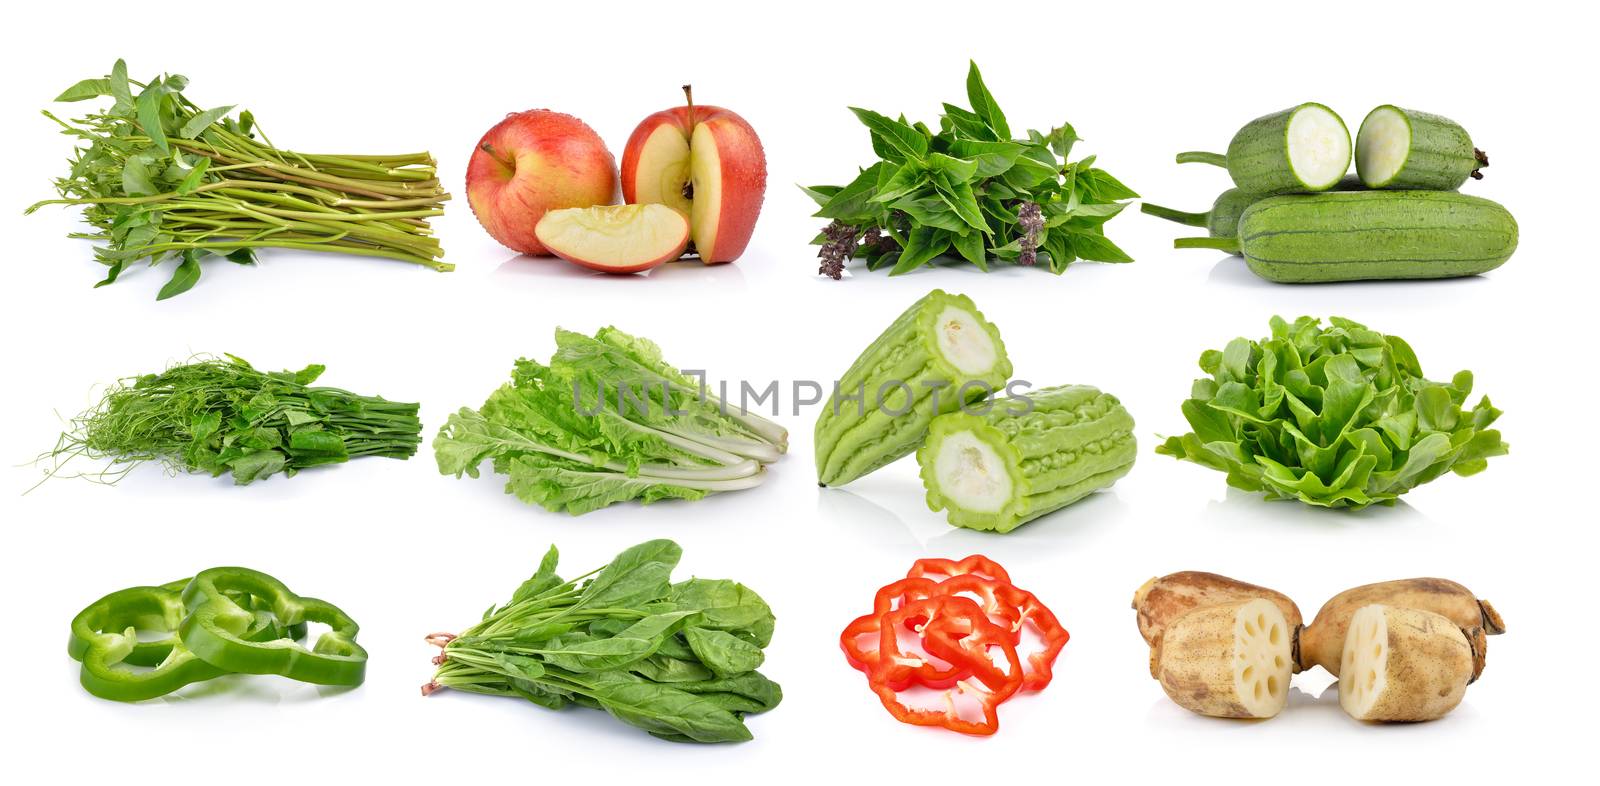 set of fruit and vegetable